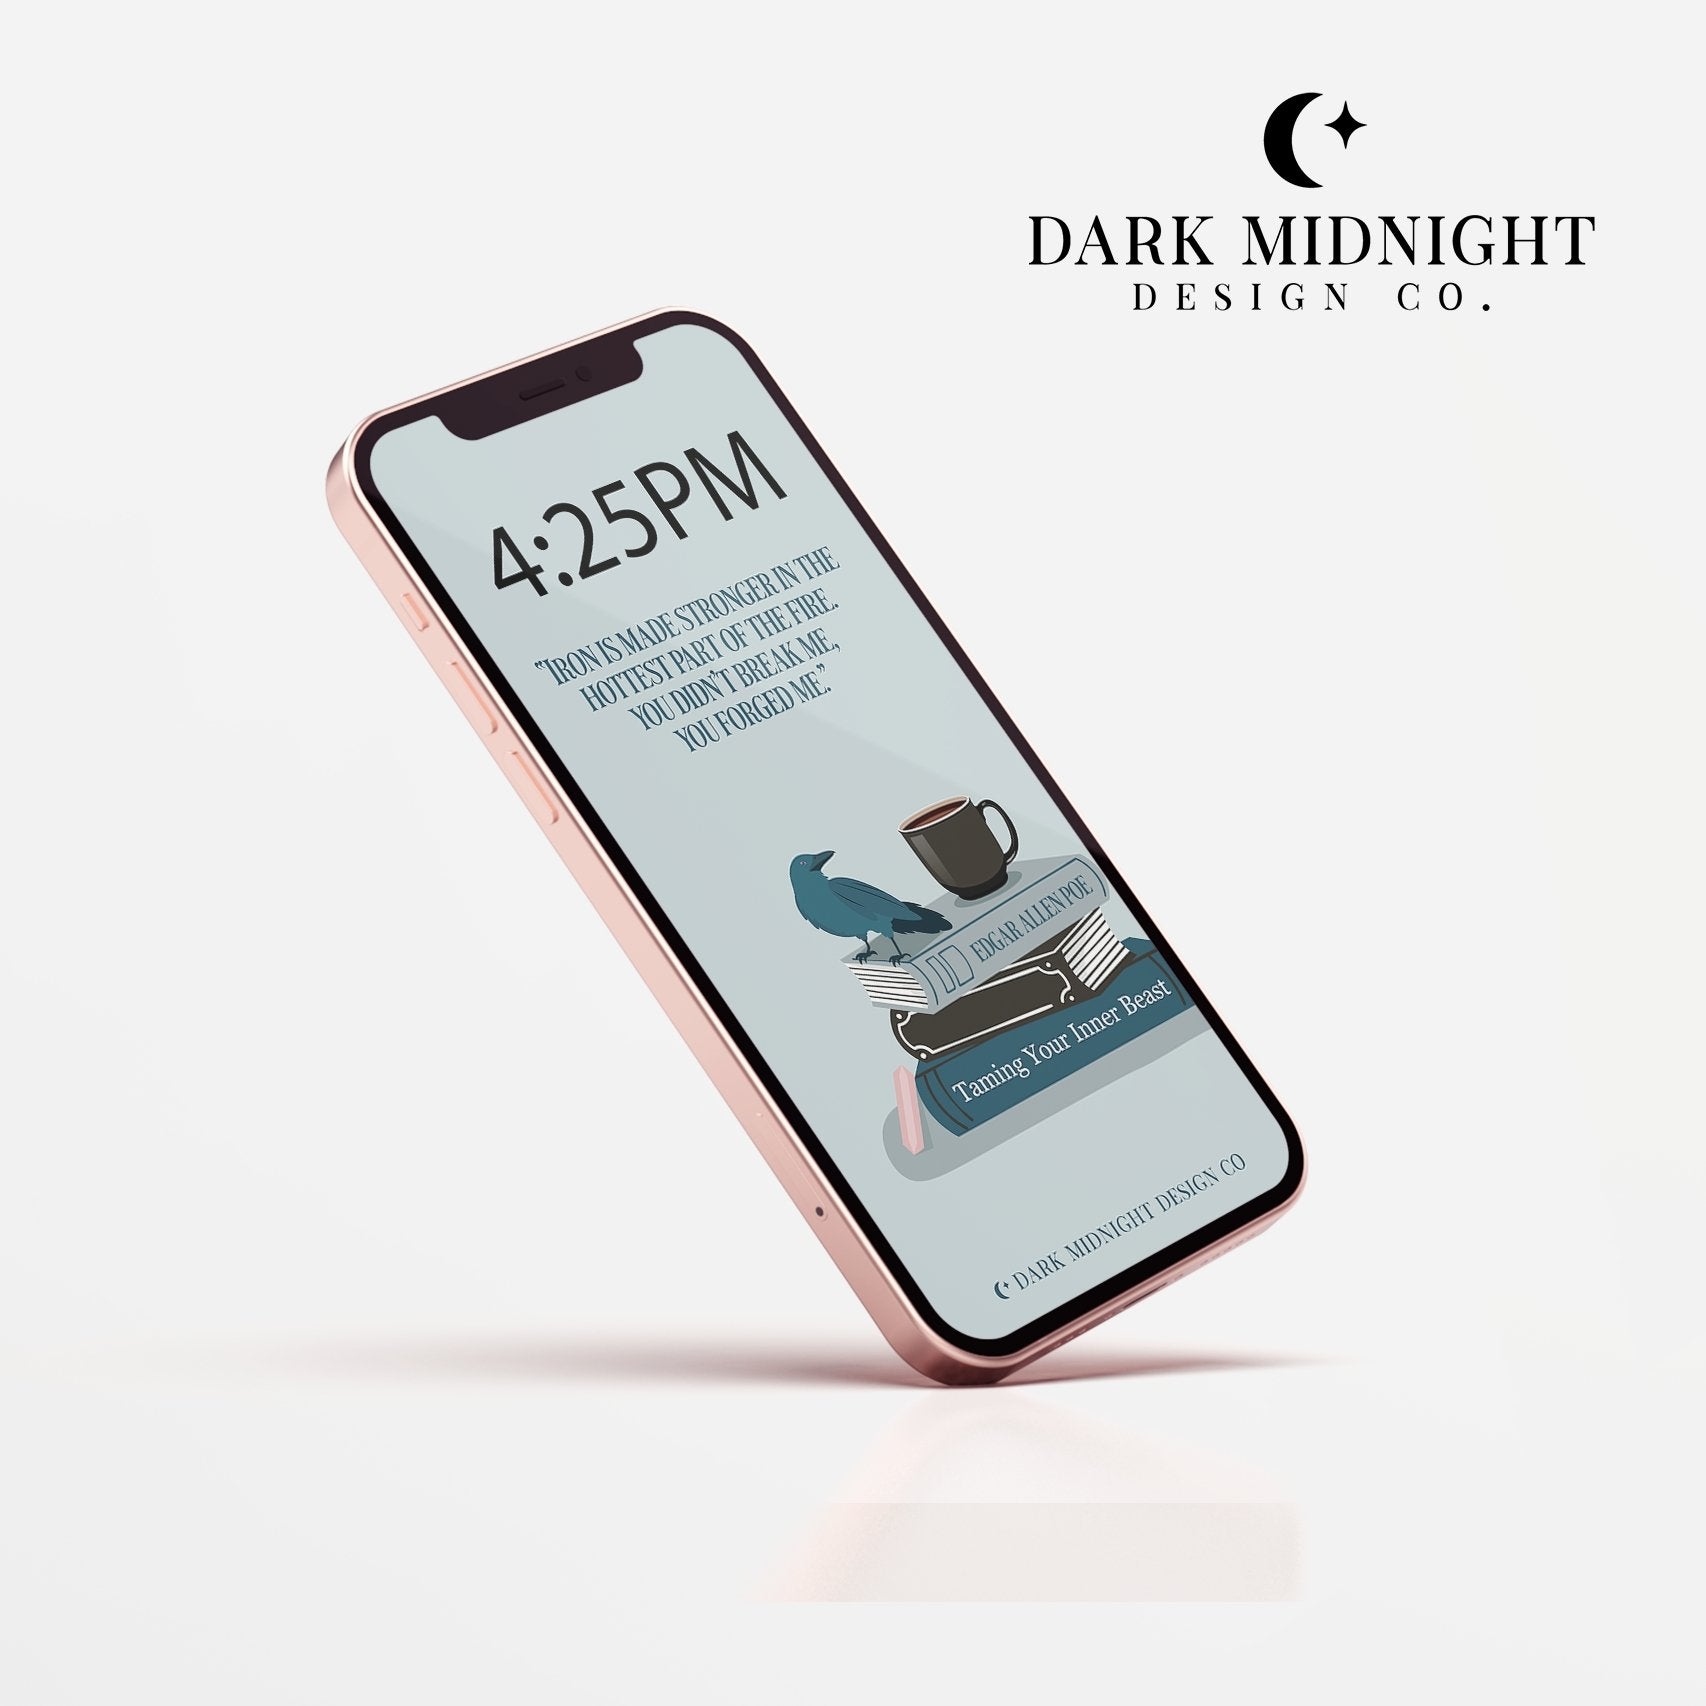 Character Anthology Phone Wallpaper - Darcy Vega - Officially Licensed Zodiac Academy Phone Wallpaper - Dark Midnight Design Co